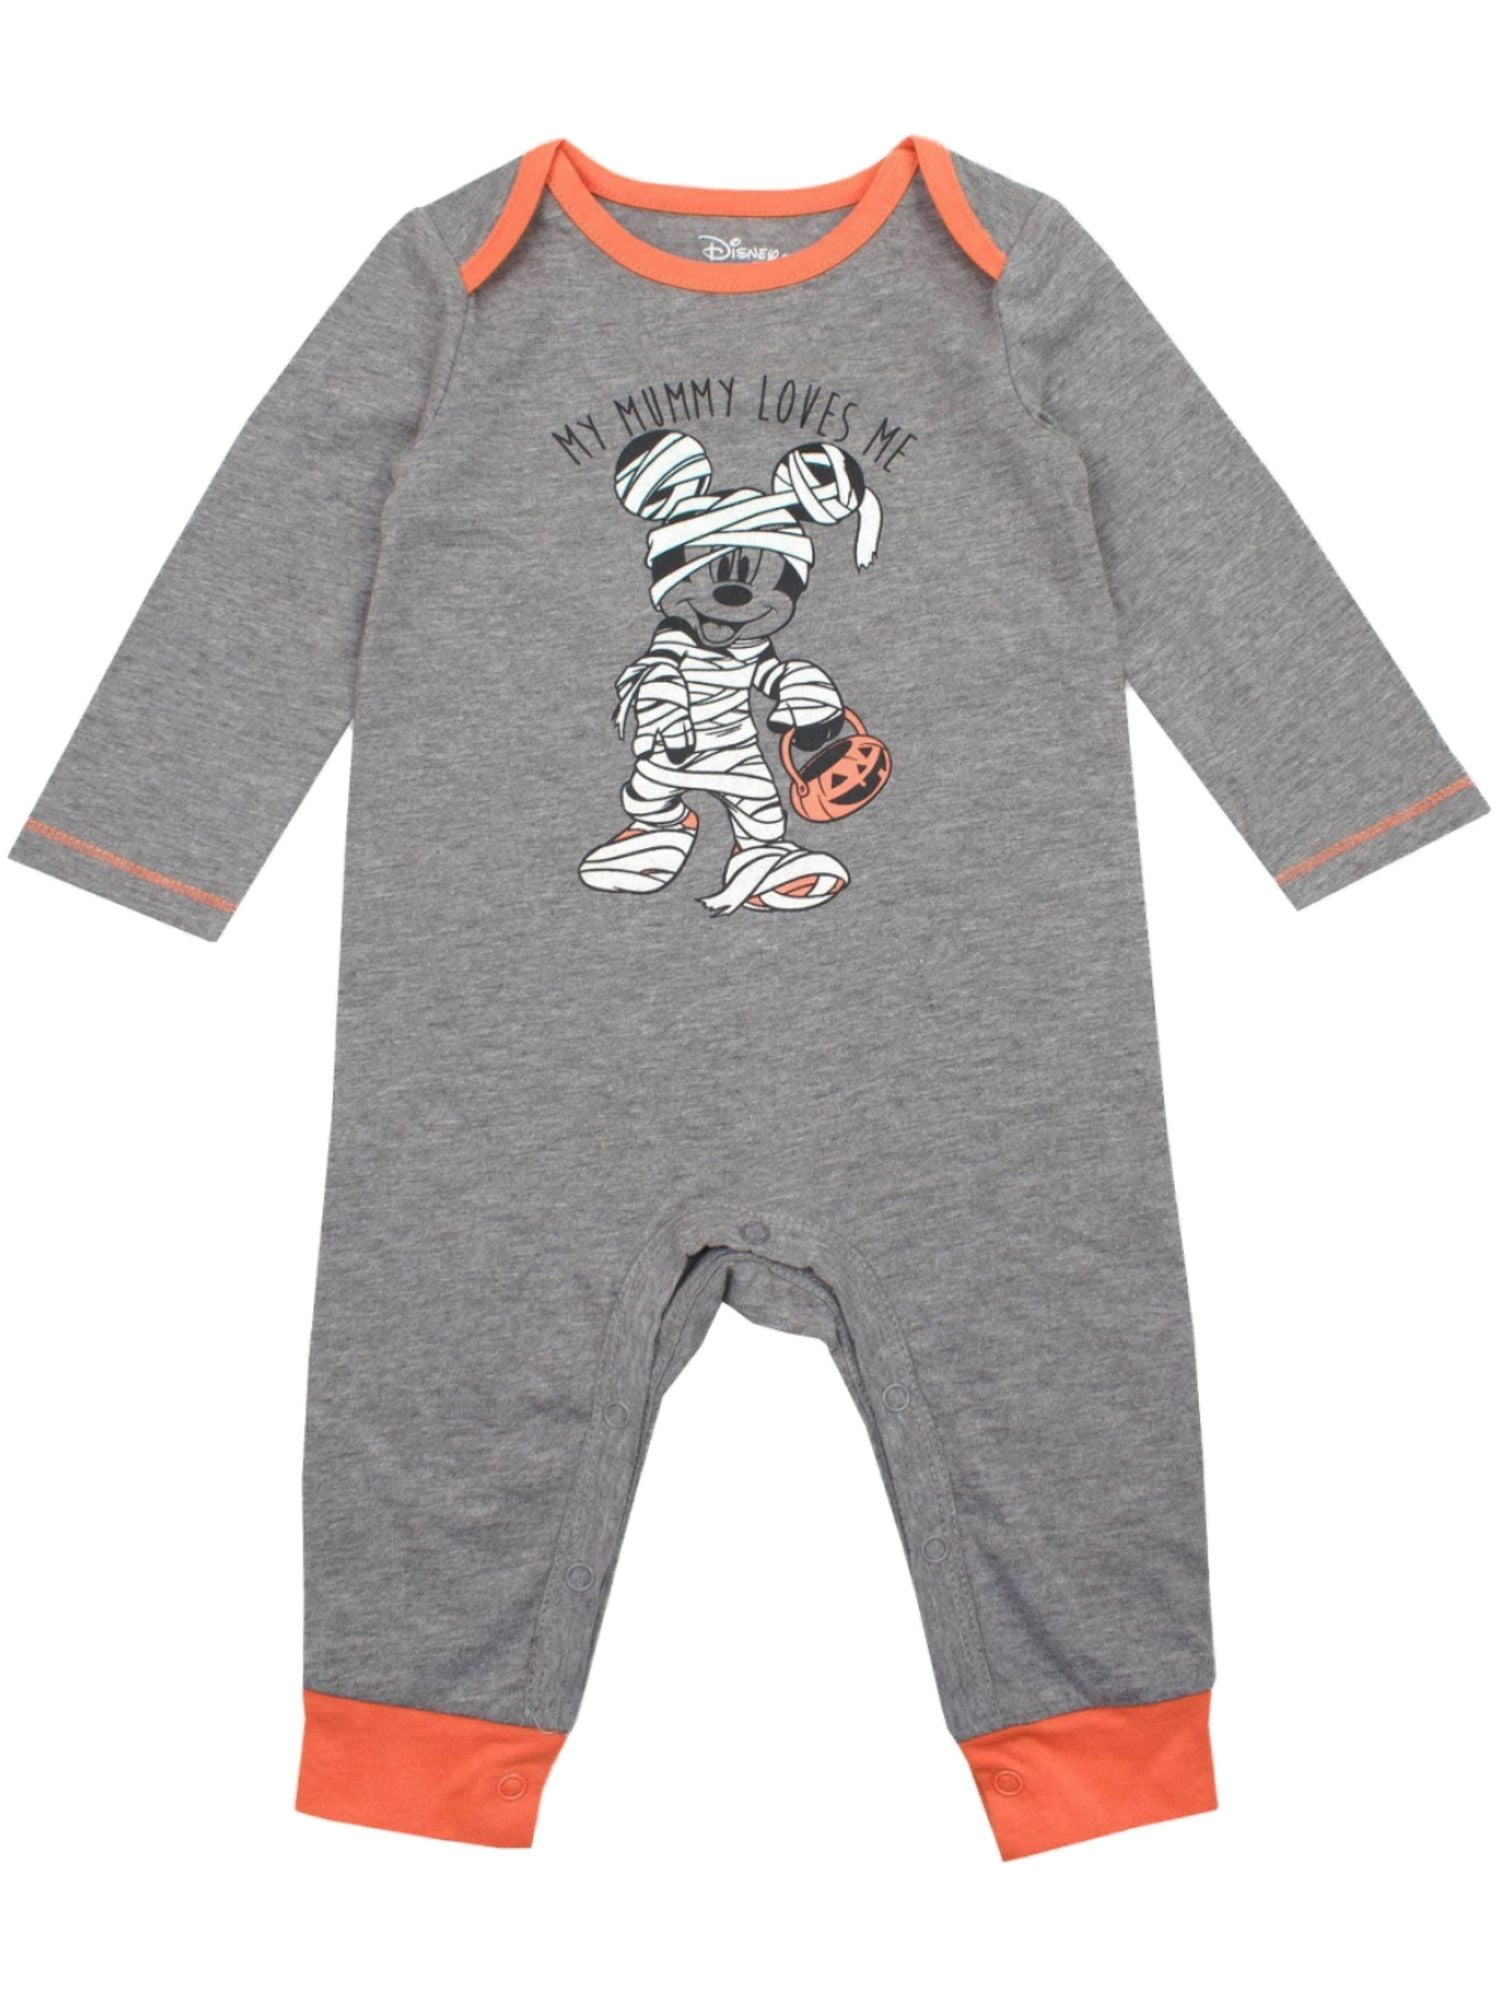 "MY MUMMY LOVES ME" 3-6 mth NEW Peanuts SNOOOY Halloween Bodysuit Romper mommy 